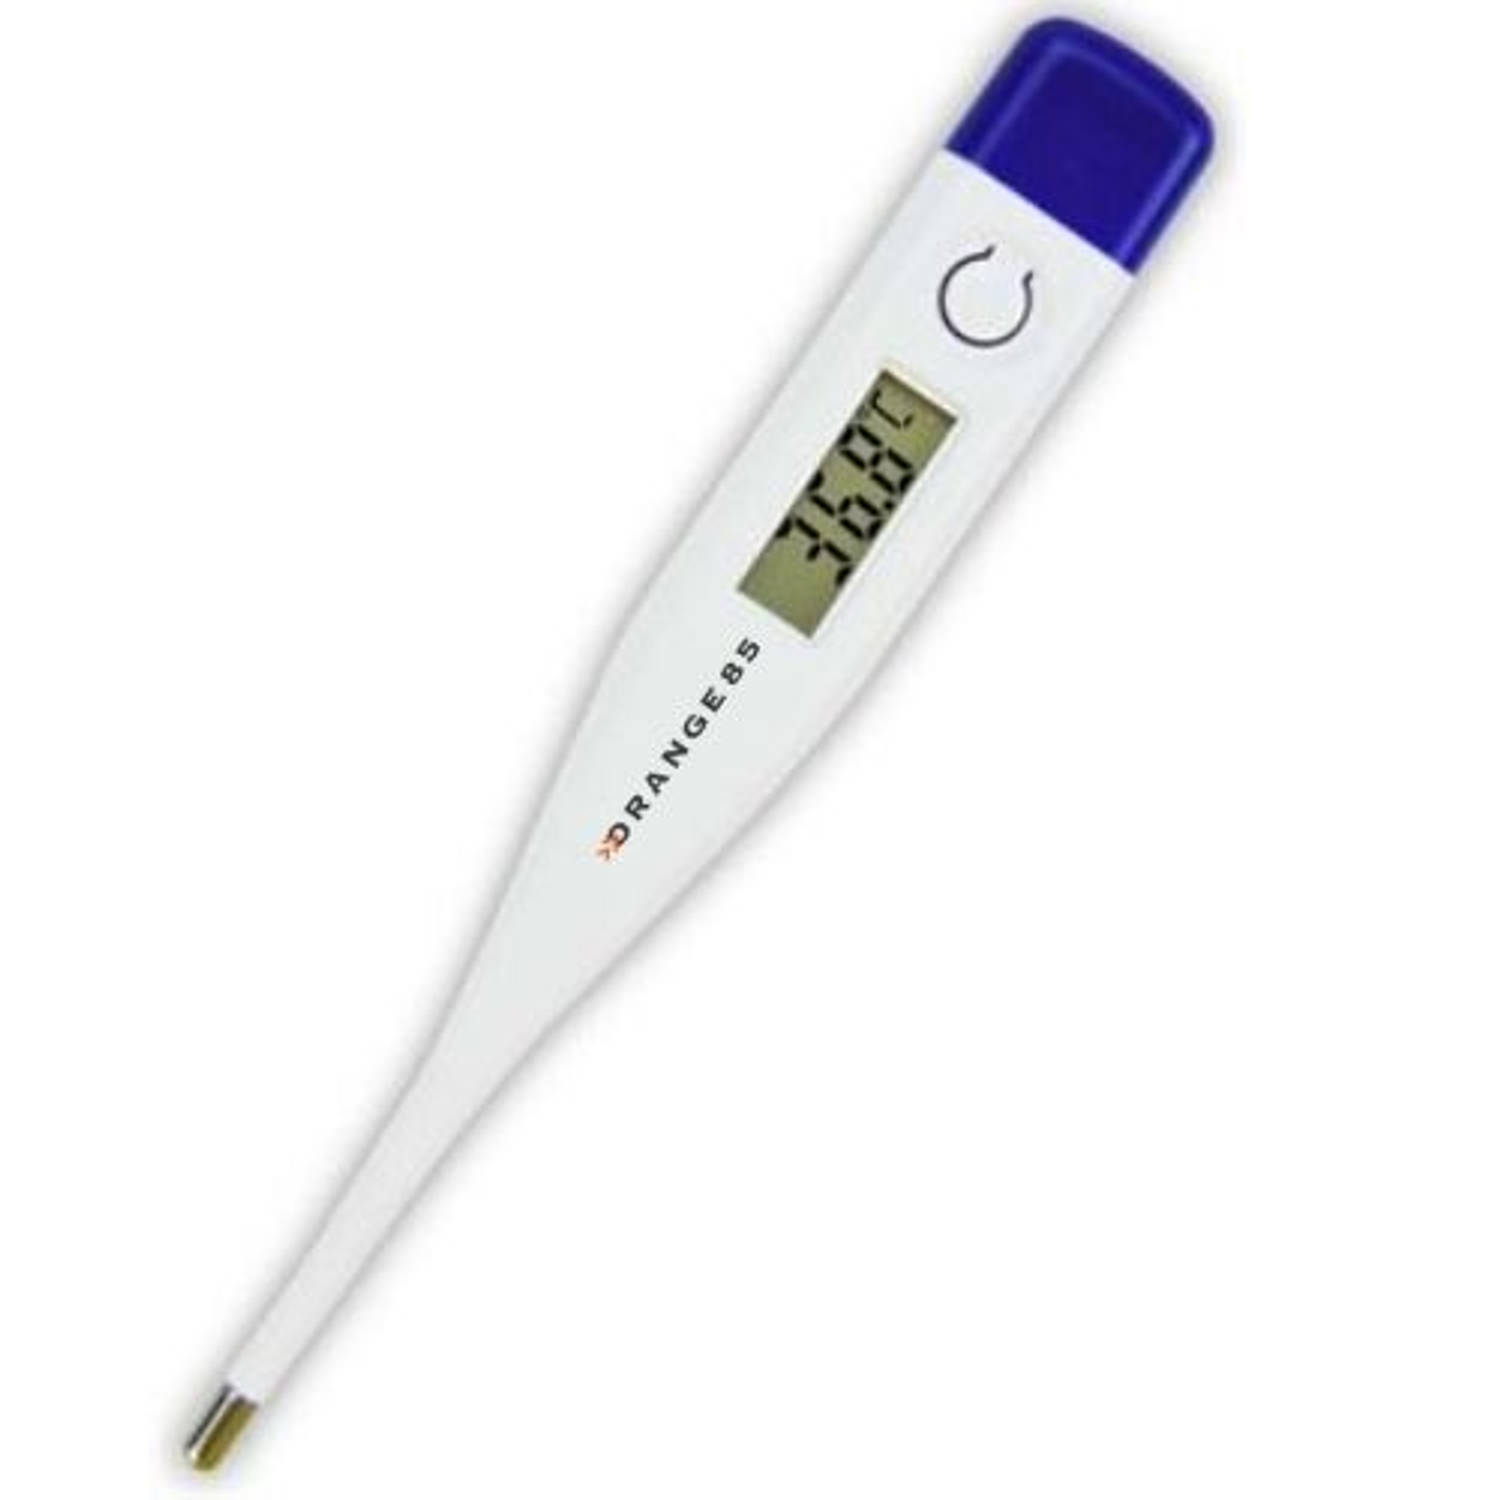 Digitale Thermometer